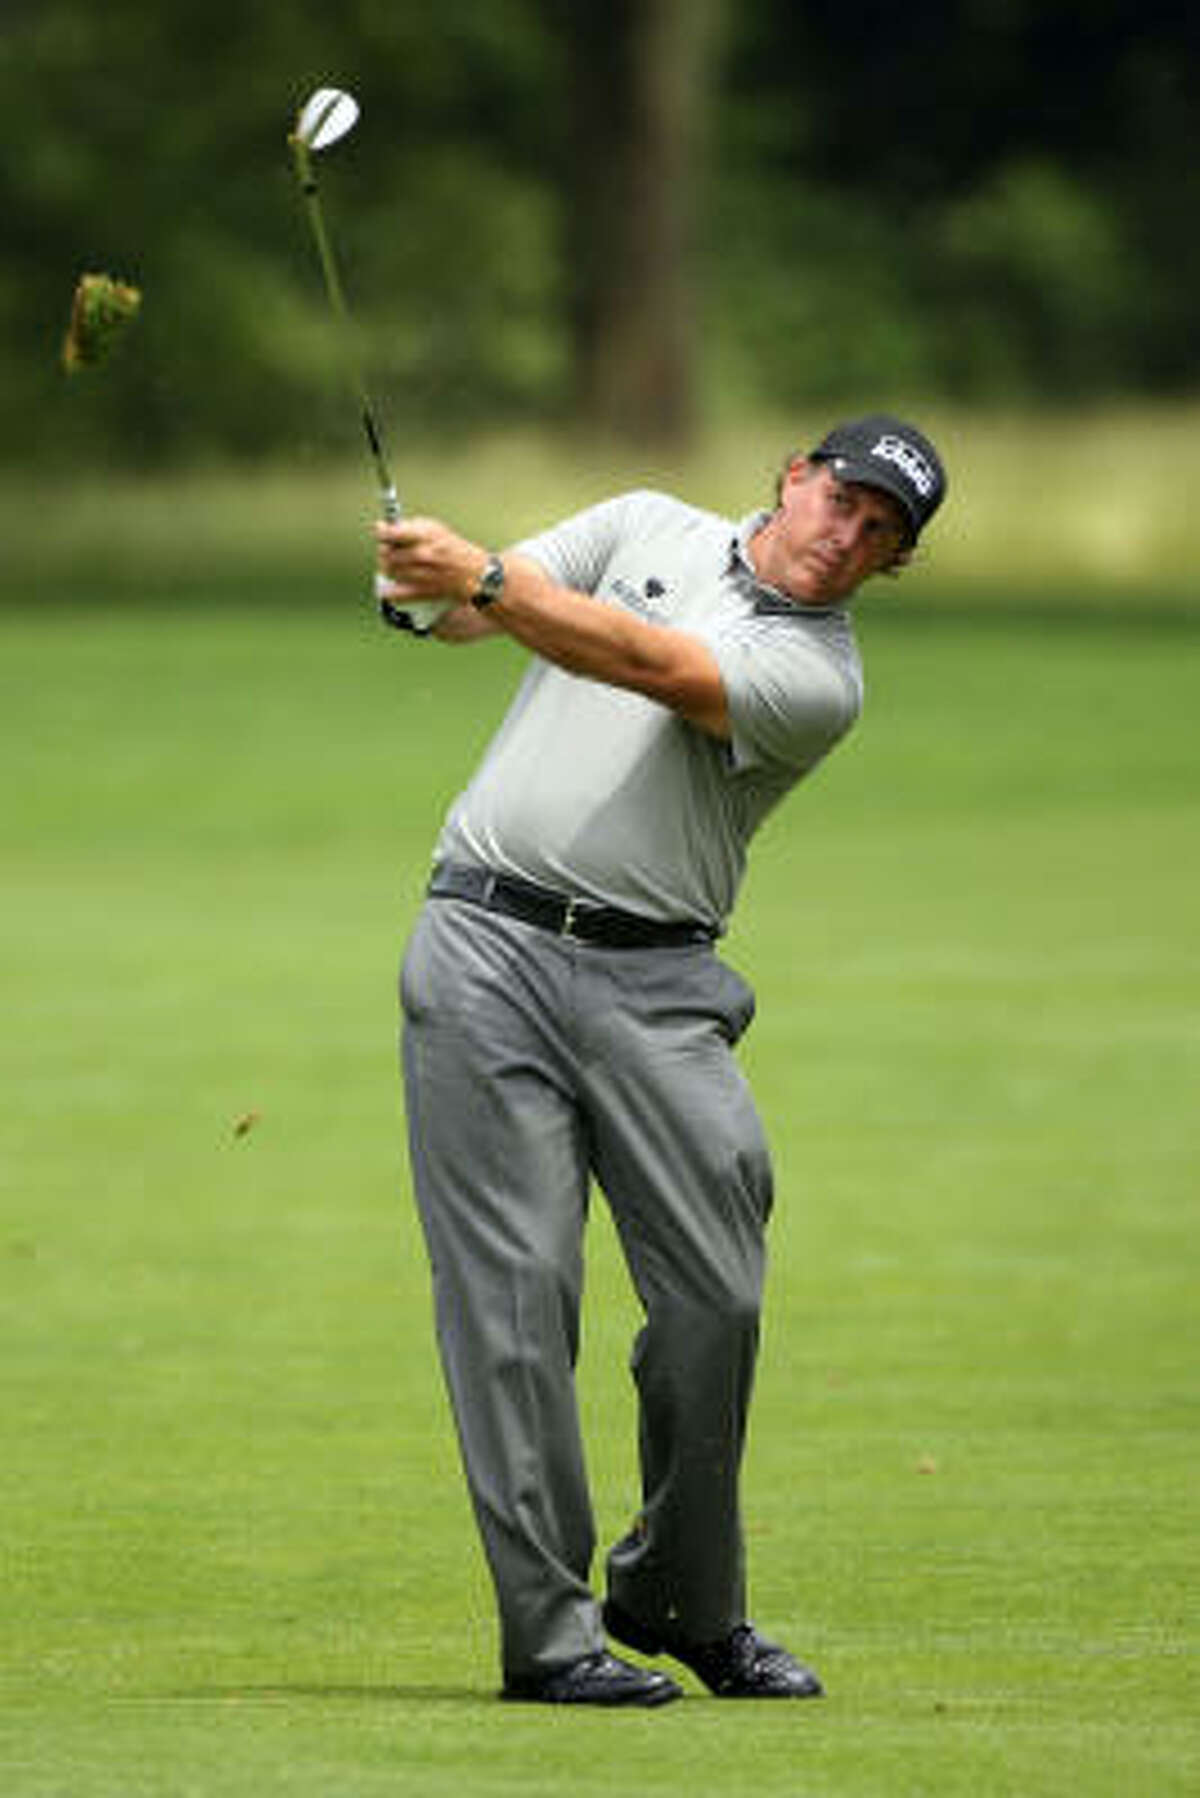 Phil Mickelson hits his approach shot on the 16th hole.